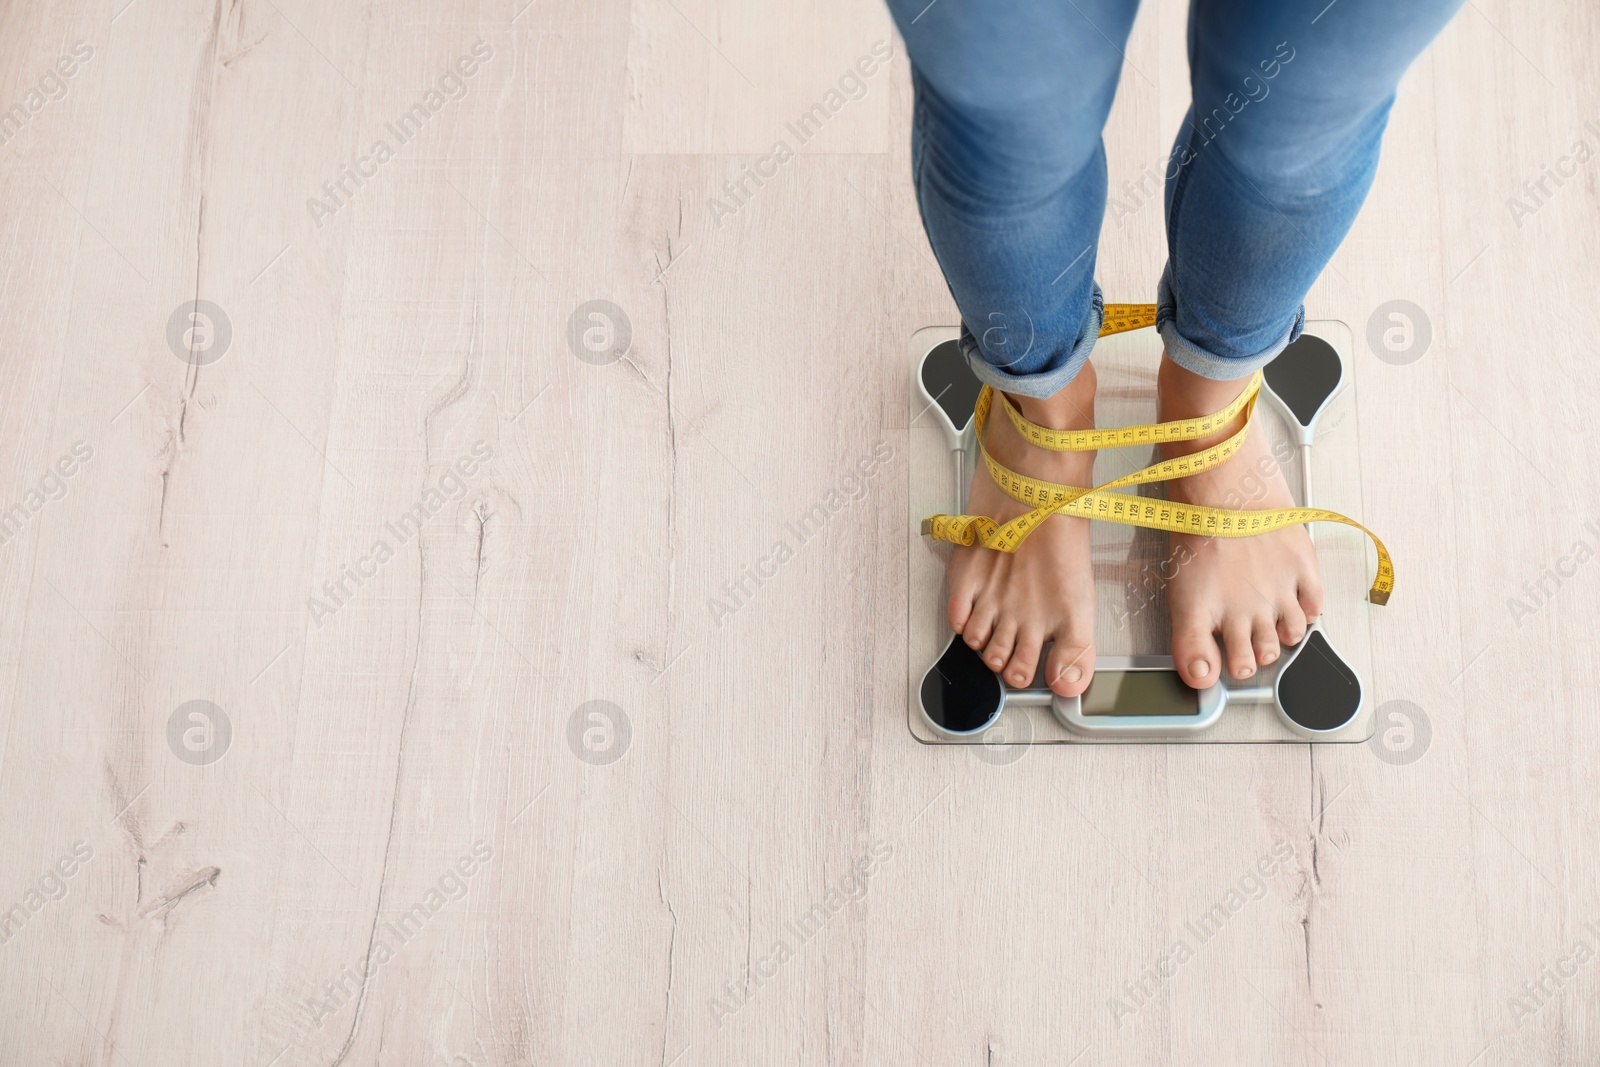 Photo of Woman with tape measuring her weight using scales on wooden floor, top view. Healthy diet